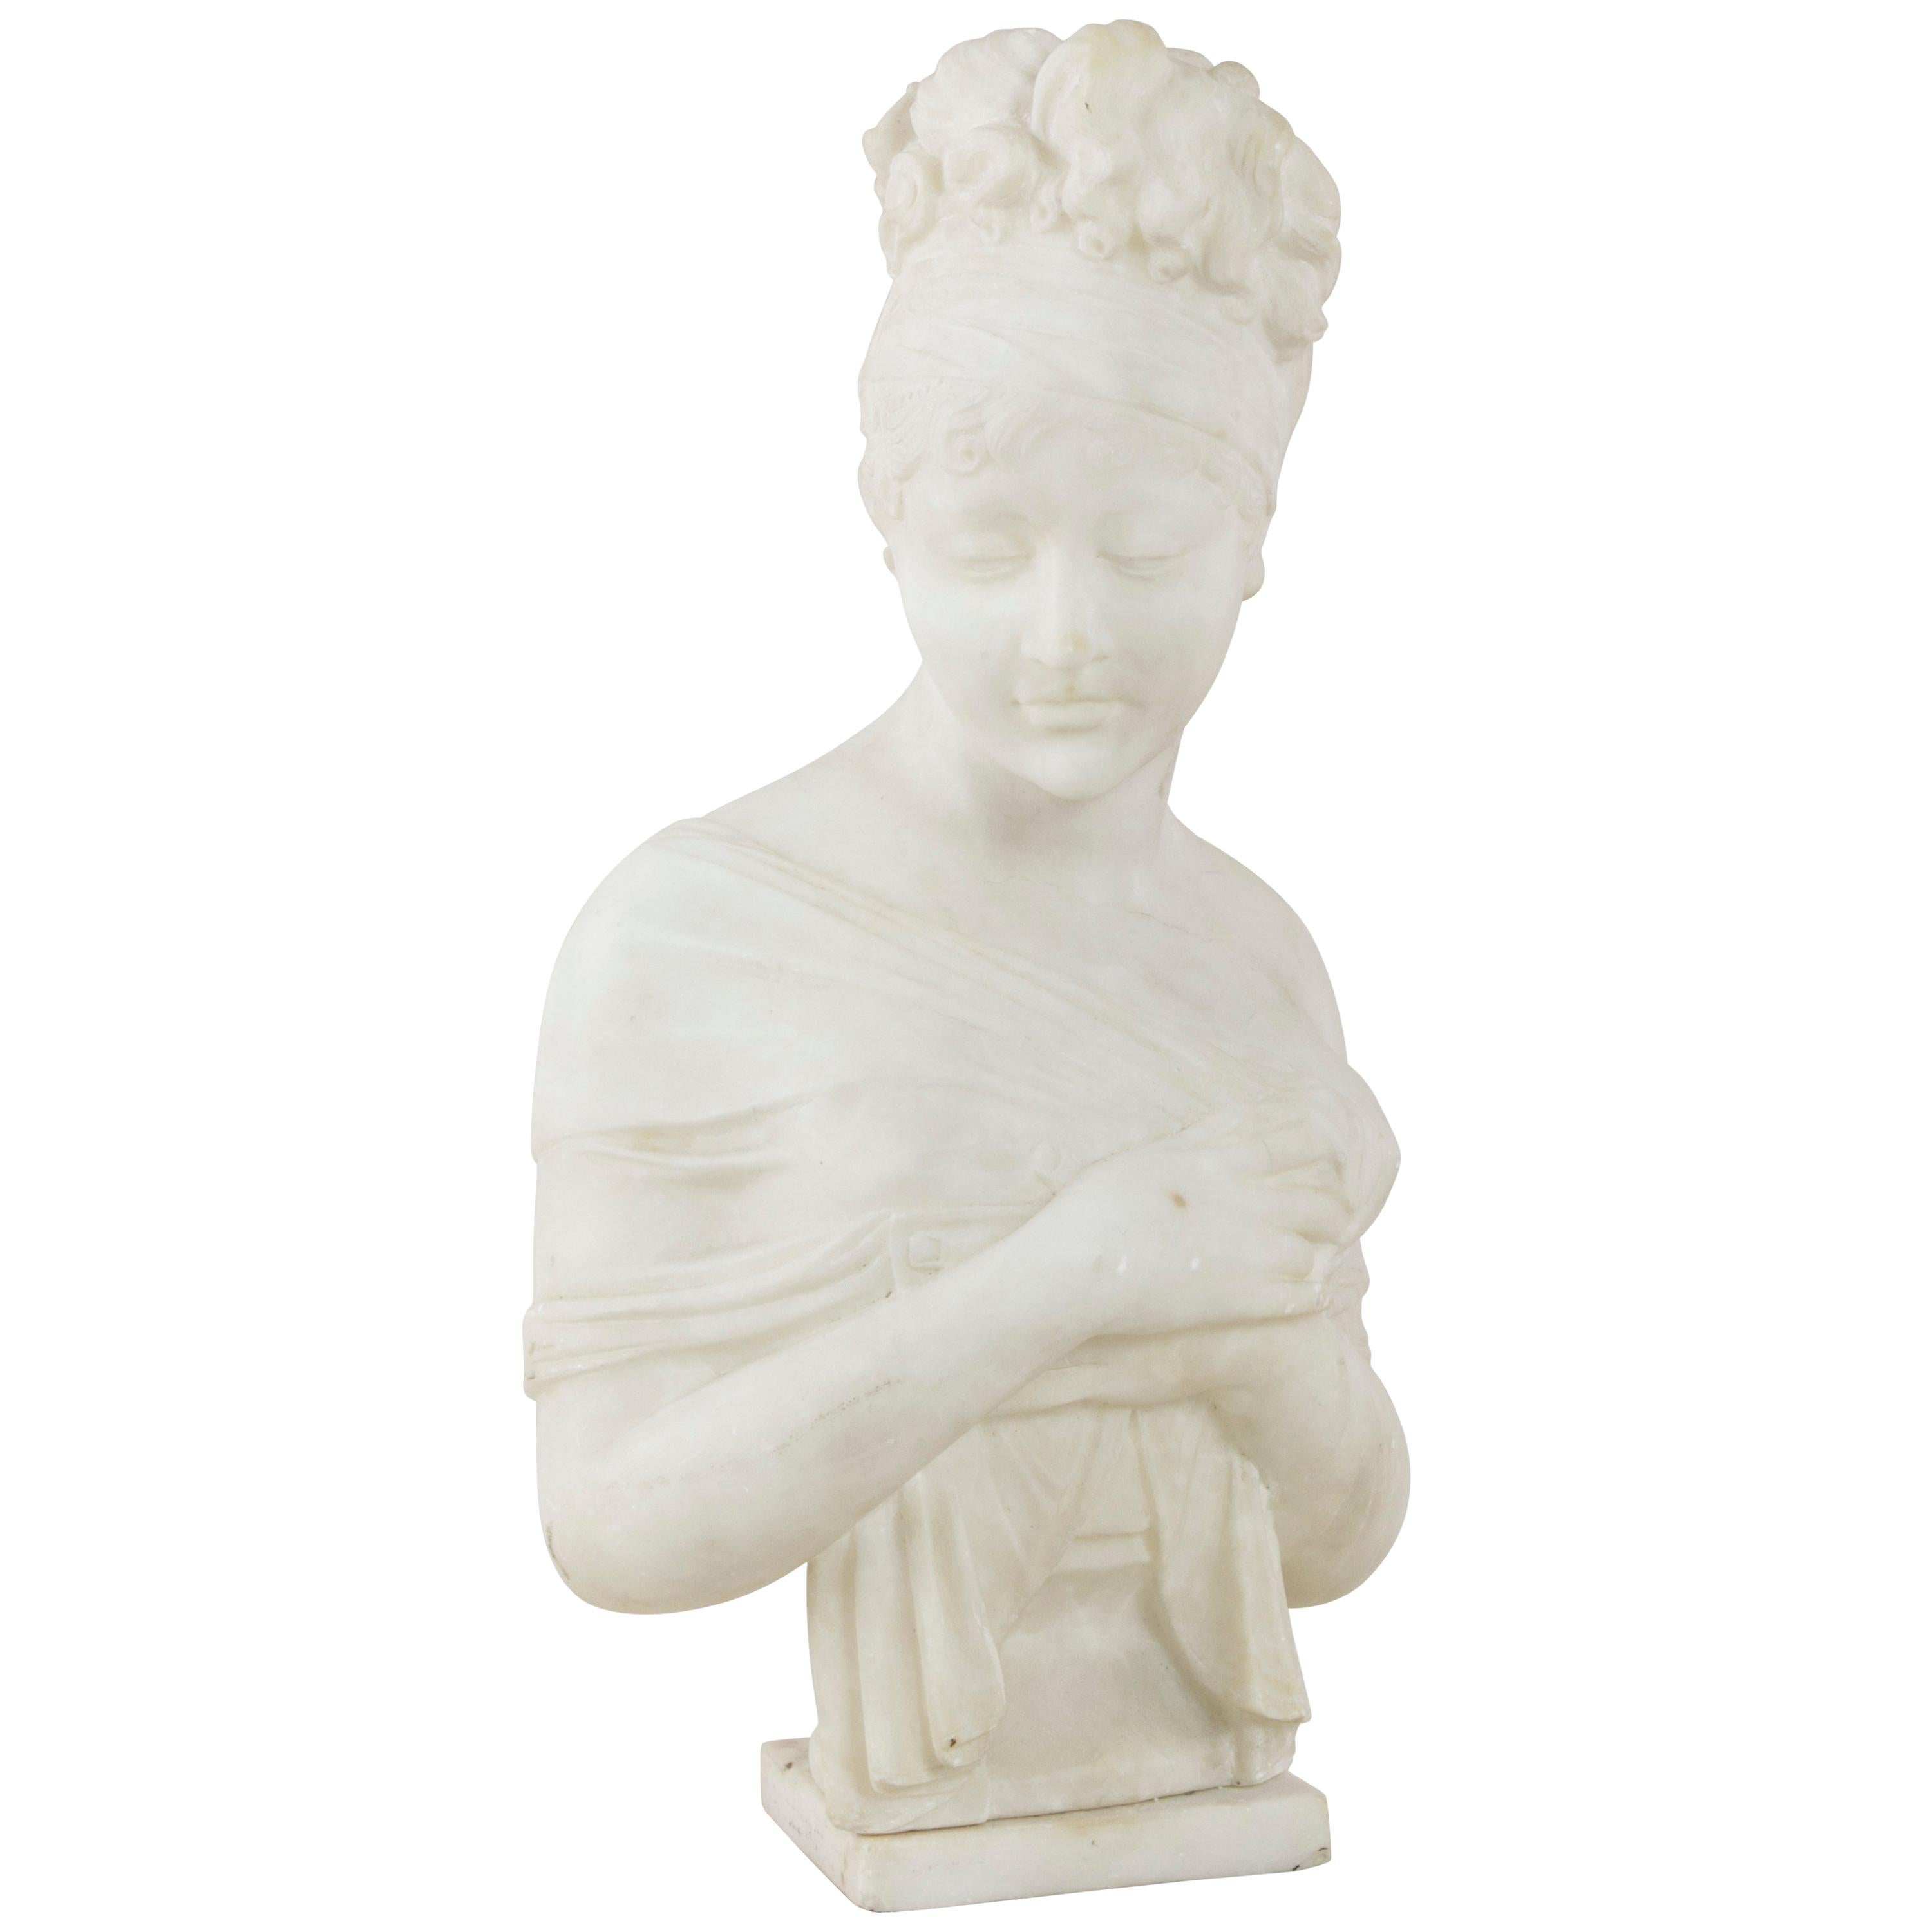 French Marble Bust or Sculpture of Madame Juliette Recamier, circa 1900